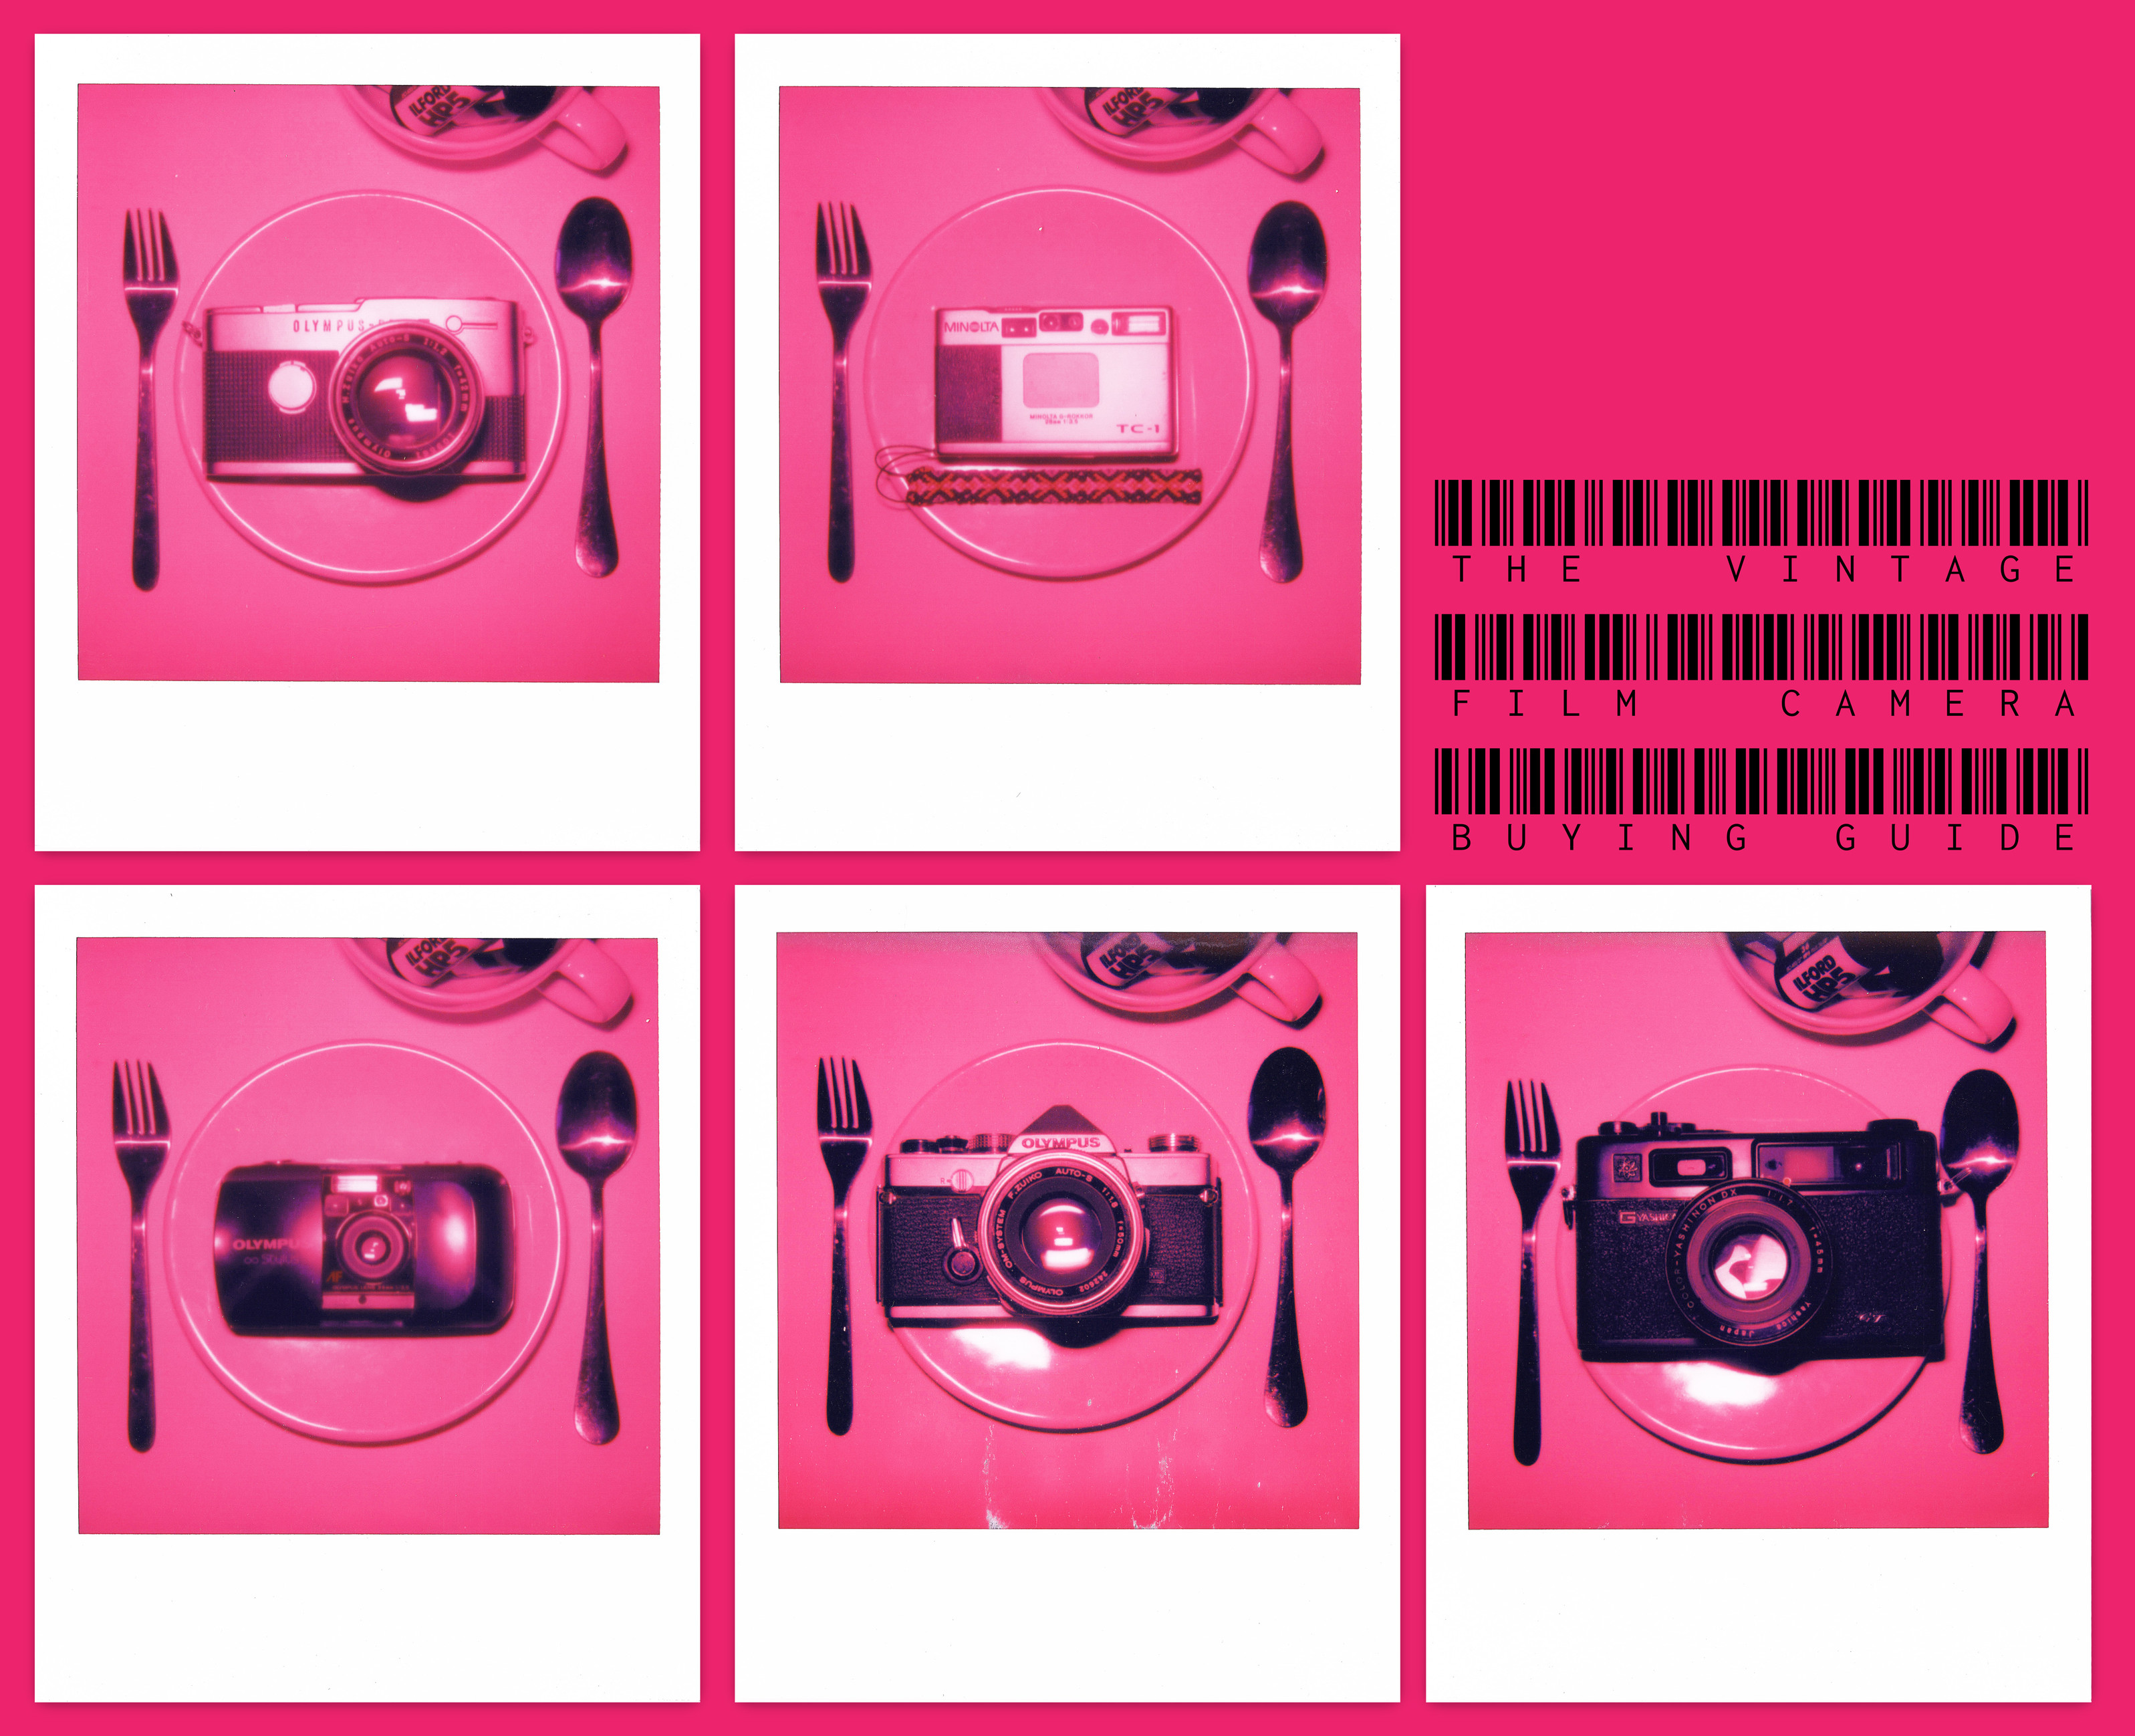 Five Polaroid photos of vintage film cameras with the title spelling "THE VINTAGE FILM CAMERA BUYING GUIDE" in font stylized with a bar code design.
The Polaroids are arranged in a grid with the title on the top-right on a pink background. The Polaroids are printed in pink, black, and white, with the cameras resting on small plates (one camera per photo) with a small fork and a spoon on the sides.